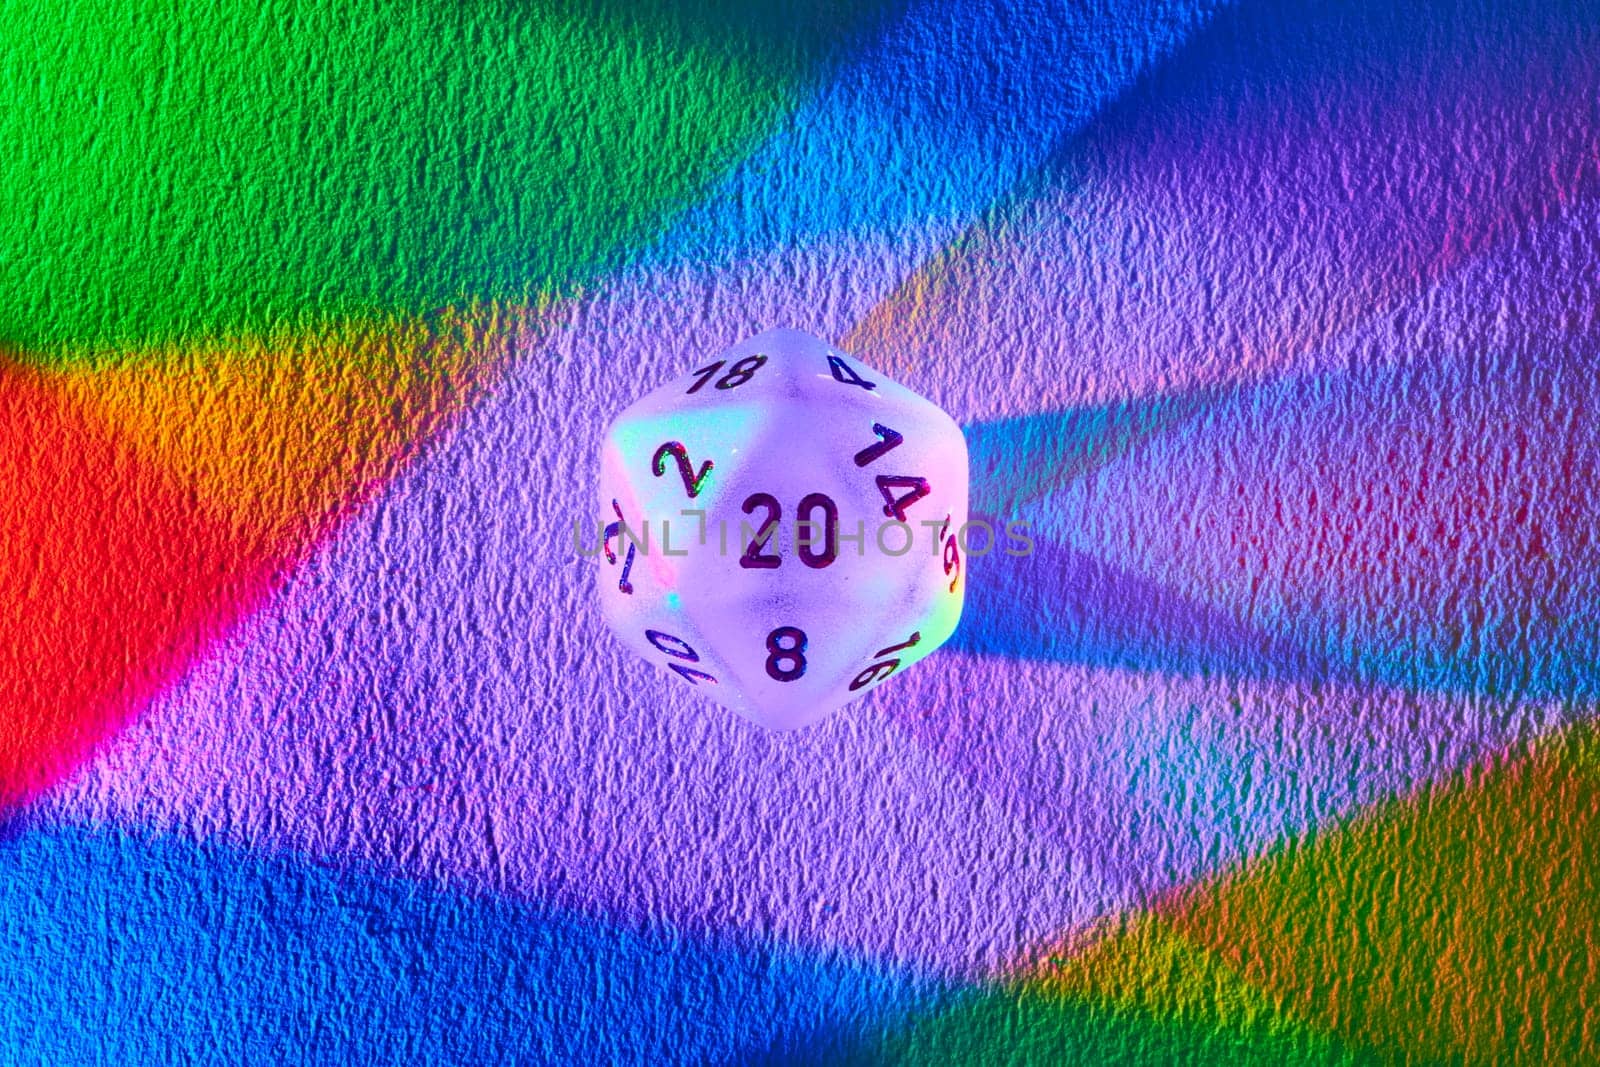 Vibrant 20-sided dice casting a rainbow spectrum on textured surface, symbolizing diversity, chance, and strategy in Fort Wayne, Indiana.